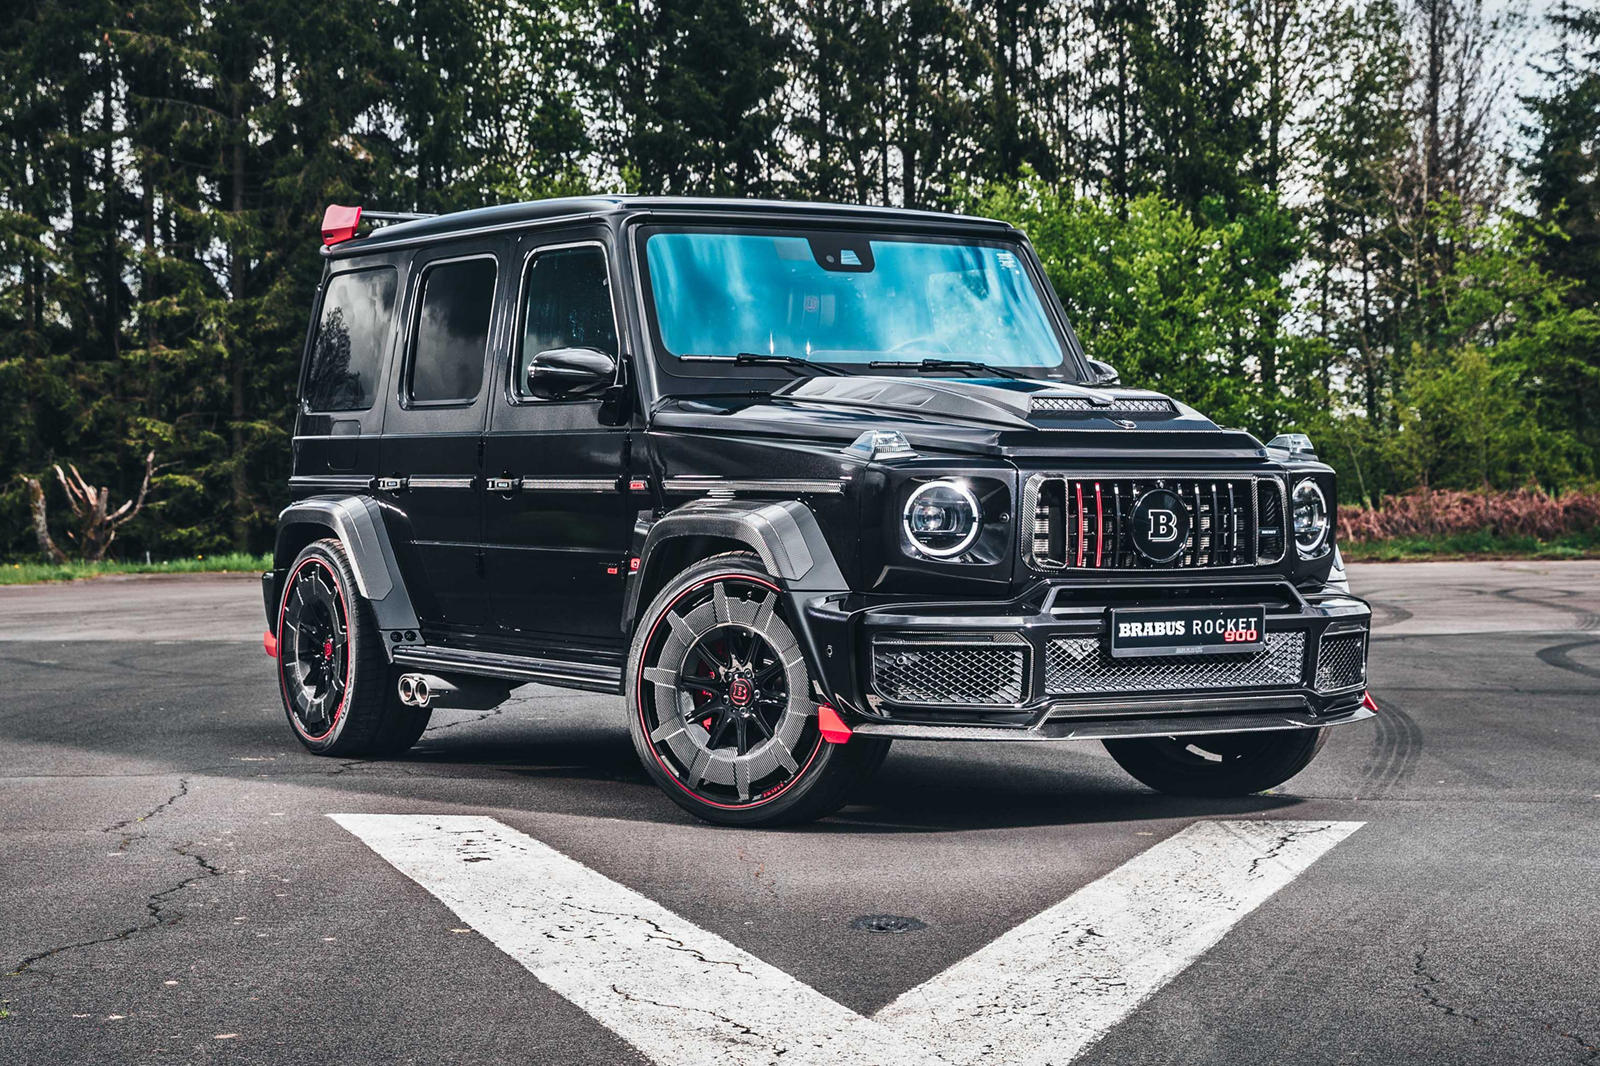 Brabus 900 Rocket Is The Most Extreme Mercedes Amg G63 Ever Made Carbuzz